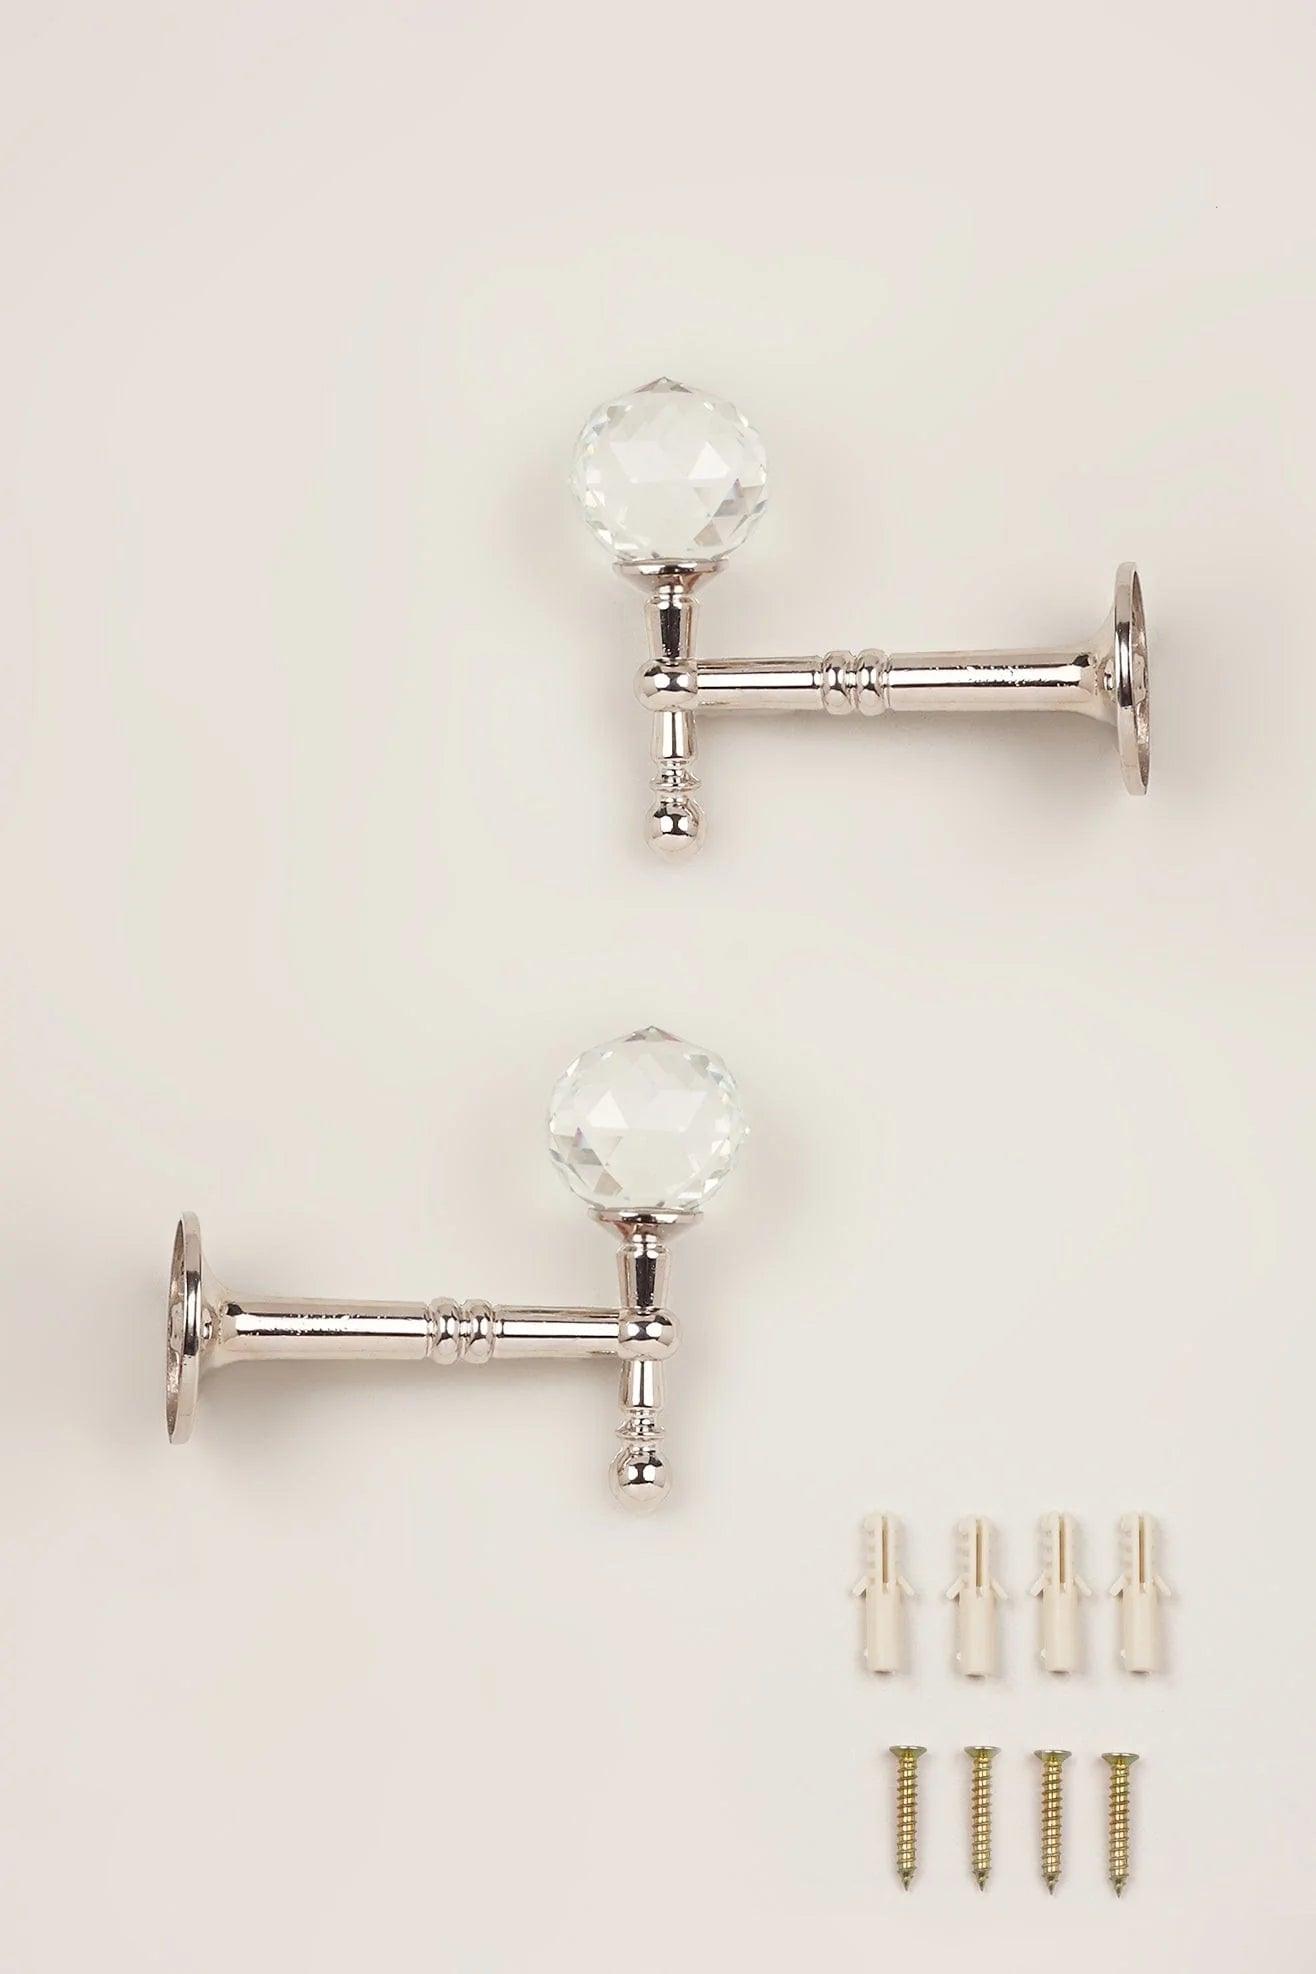 G Decor All Hooks Pack of 2 Faceted Crystal Curtain Tie Backs, Chrome Finish